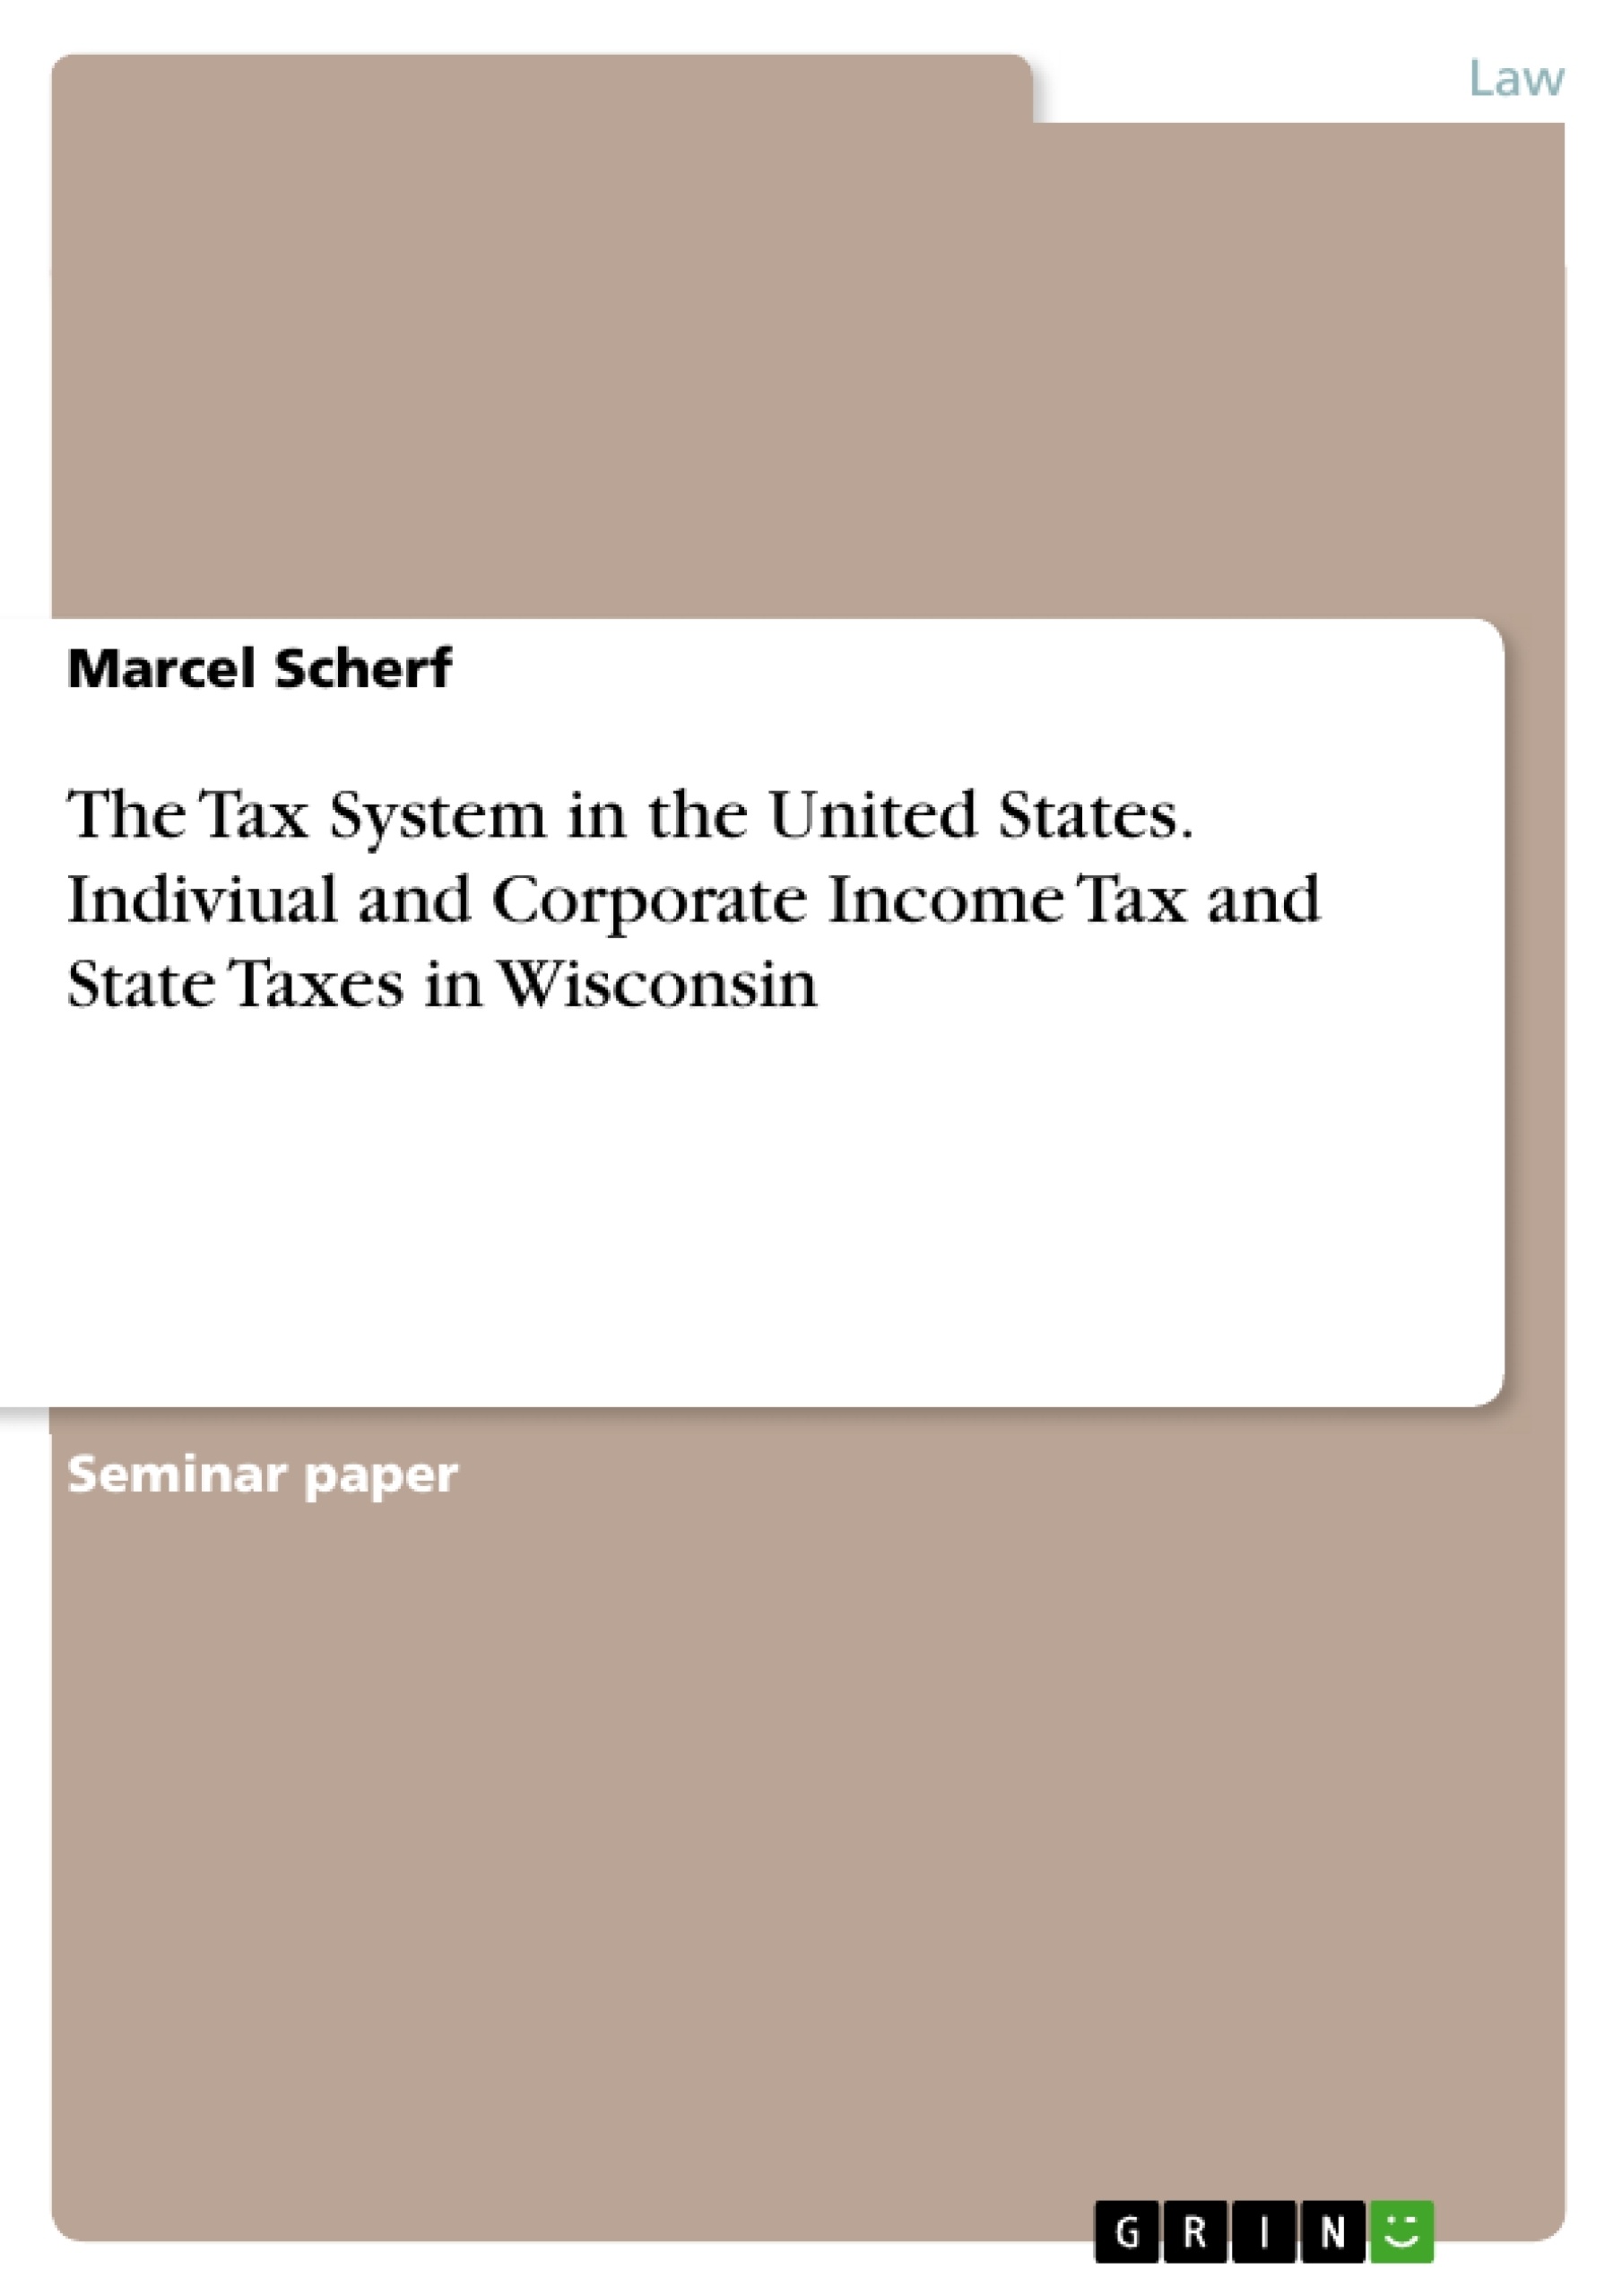 Title: The Tax System in the United States. Indiviual and Corporate Income Tax and State Taxes in Wisconsin